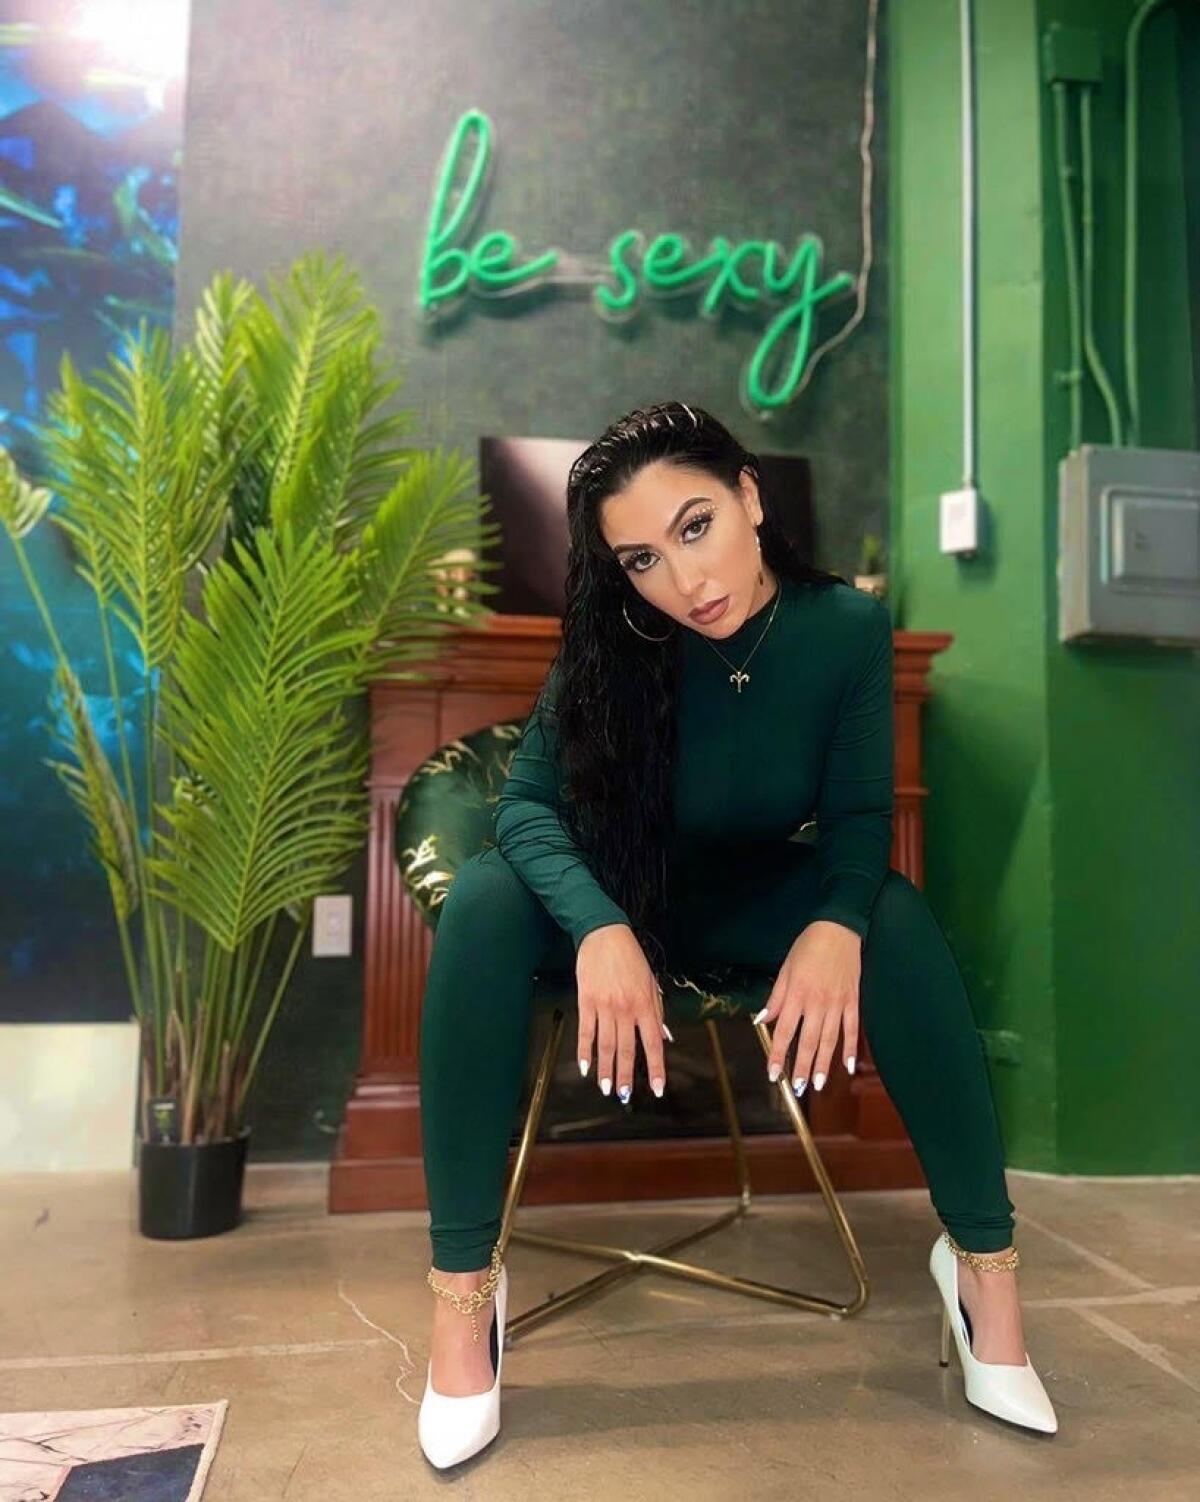 Jessica Vanessa, a social media influencer, sits in a chair beneath a neon sign reading "be sexy."